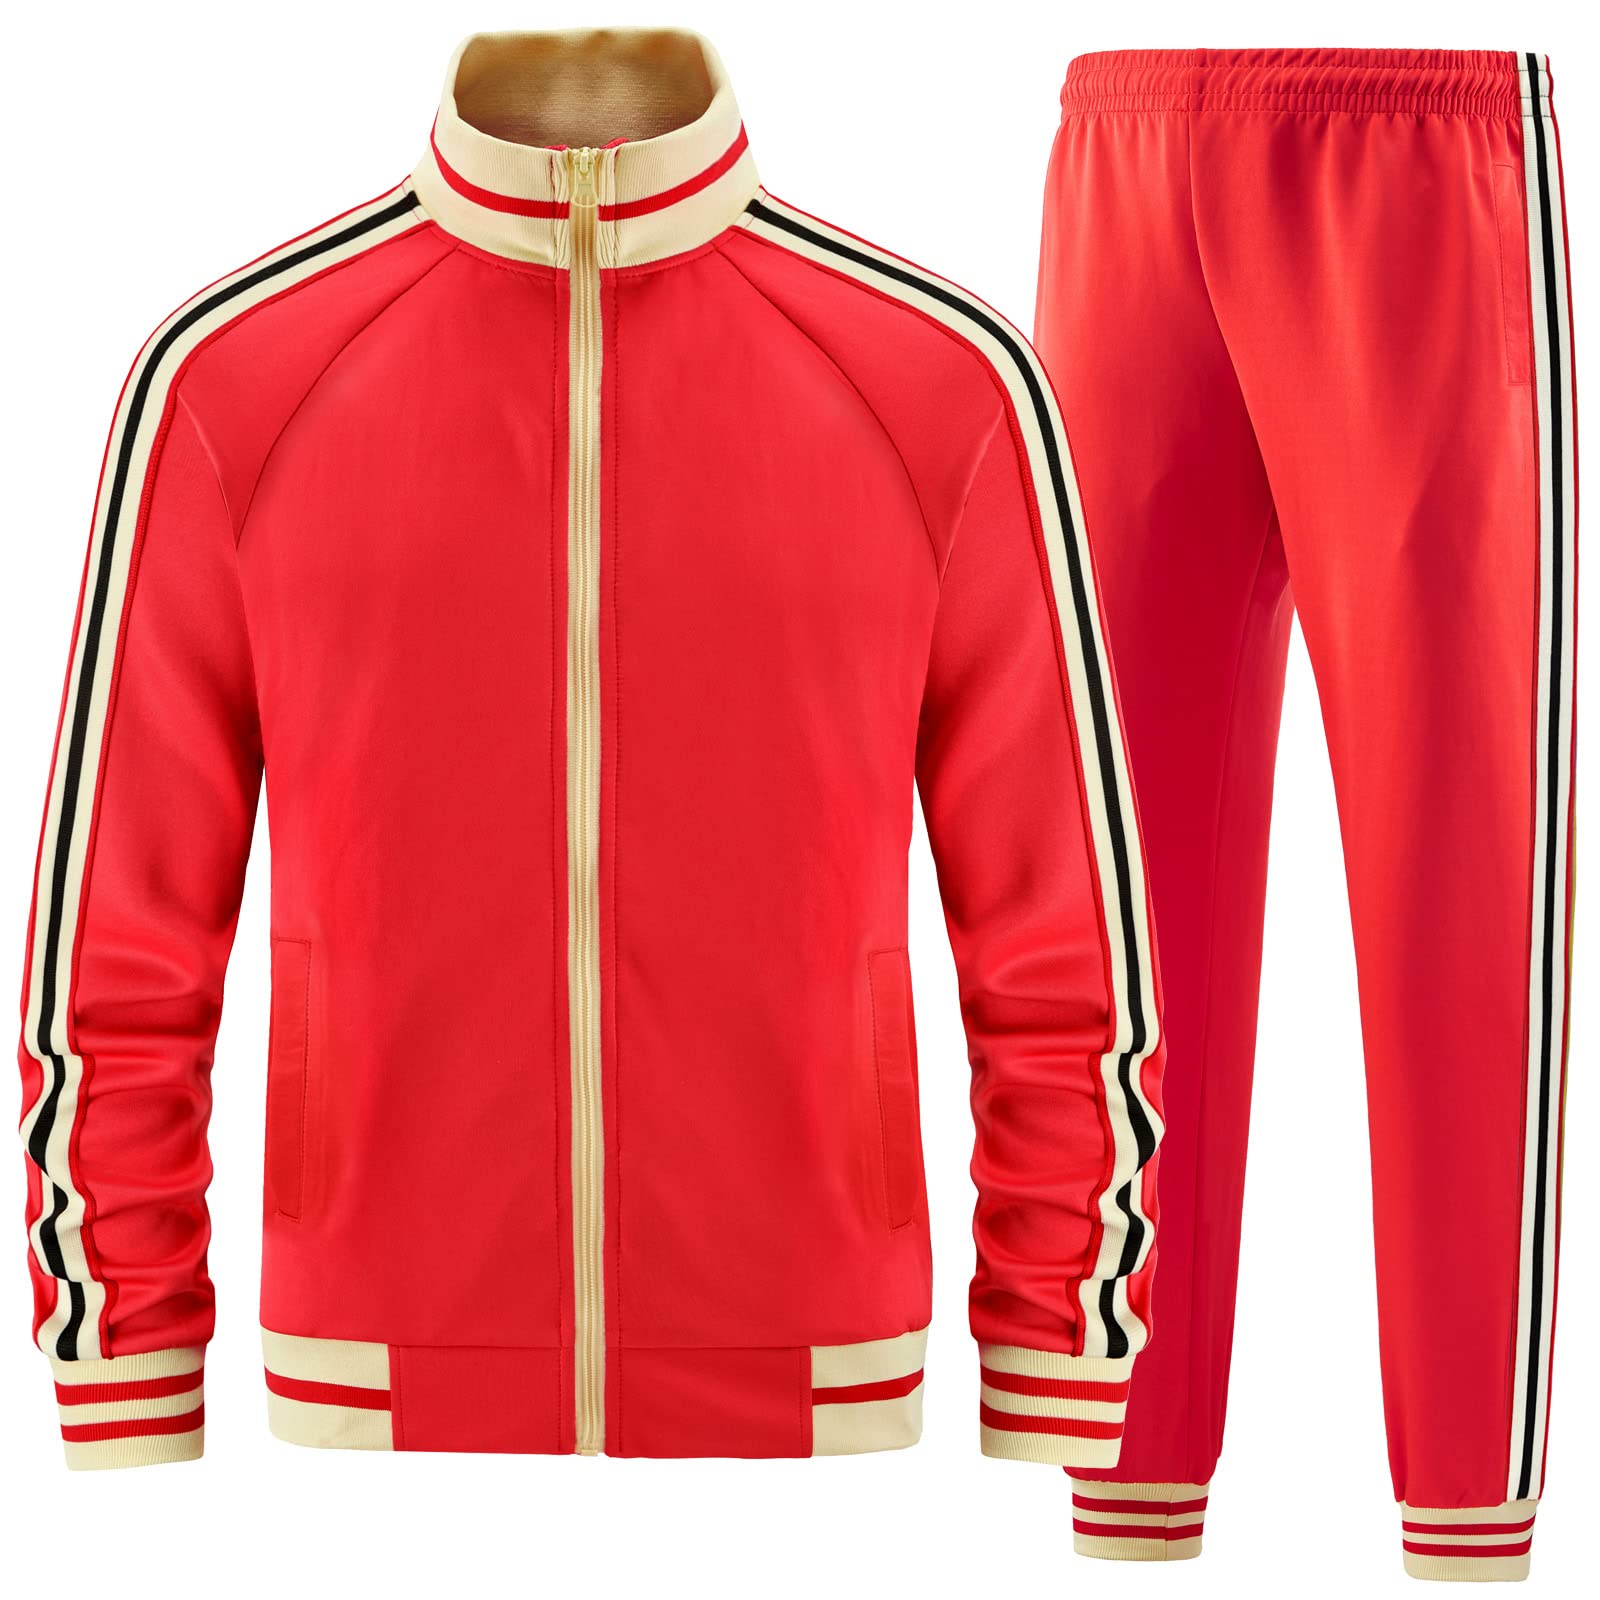 dioxoib Track Suits for Men Set 2 Piece Tracksuits Mens Sweatsuits Sets Jogging Two Piece Outfits Athletic Clothes Jogger Sweat Suits Running Sport leisure Clothing Red Ai-TZ003-S